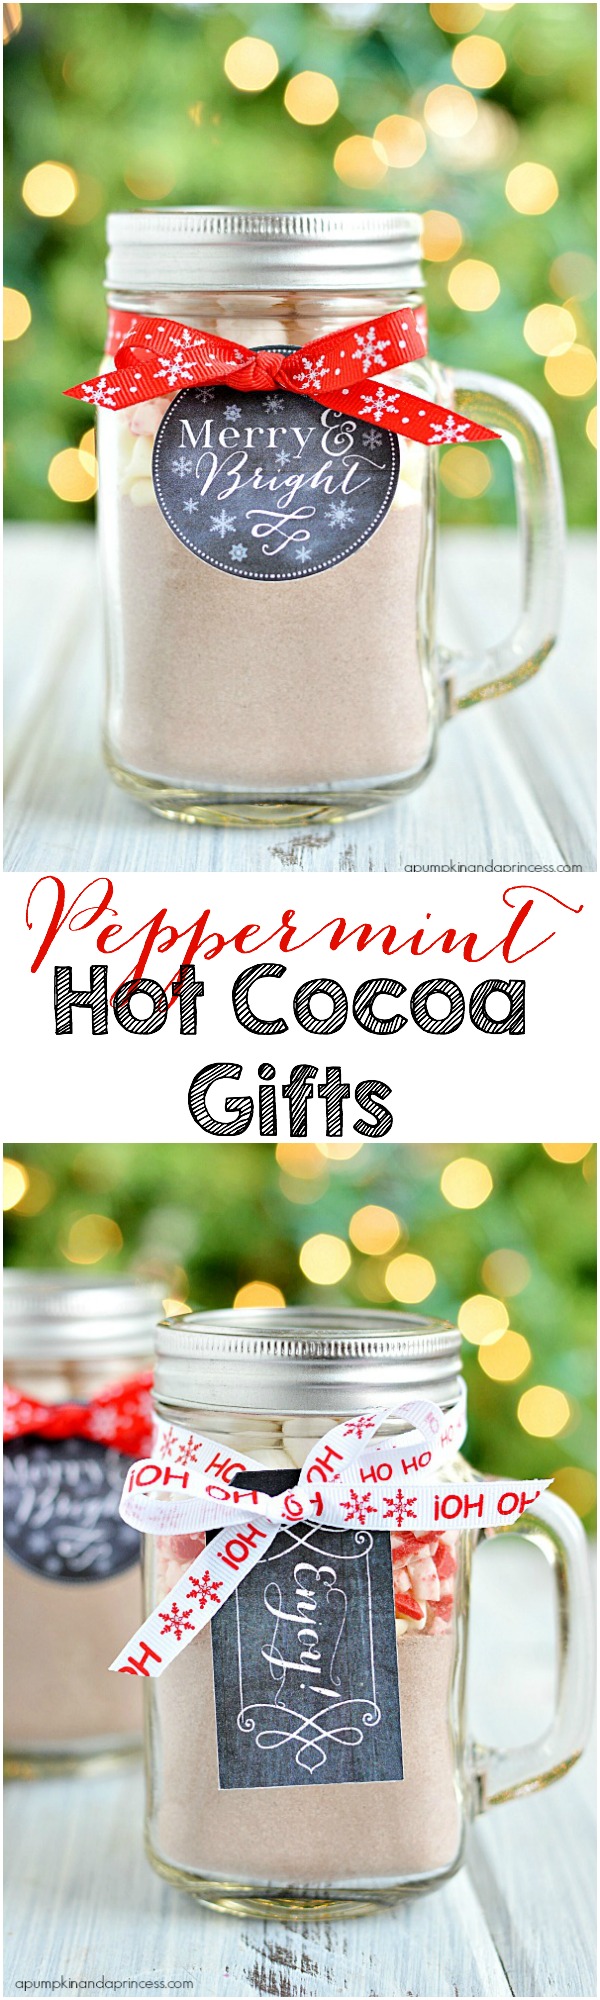 Peppermint Hot Cocoa Gifts